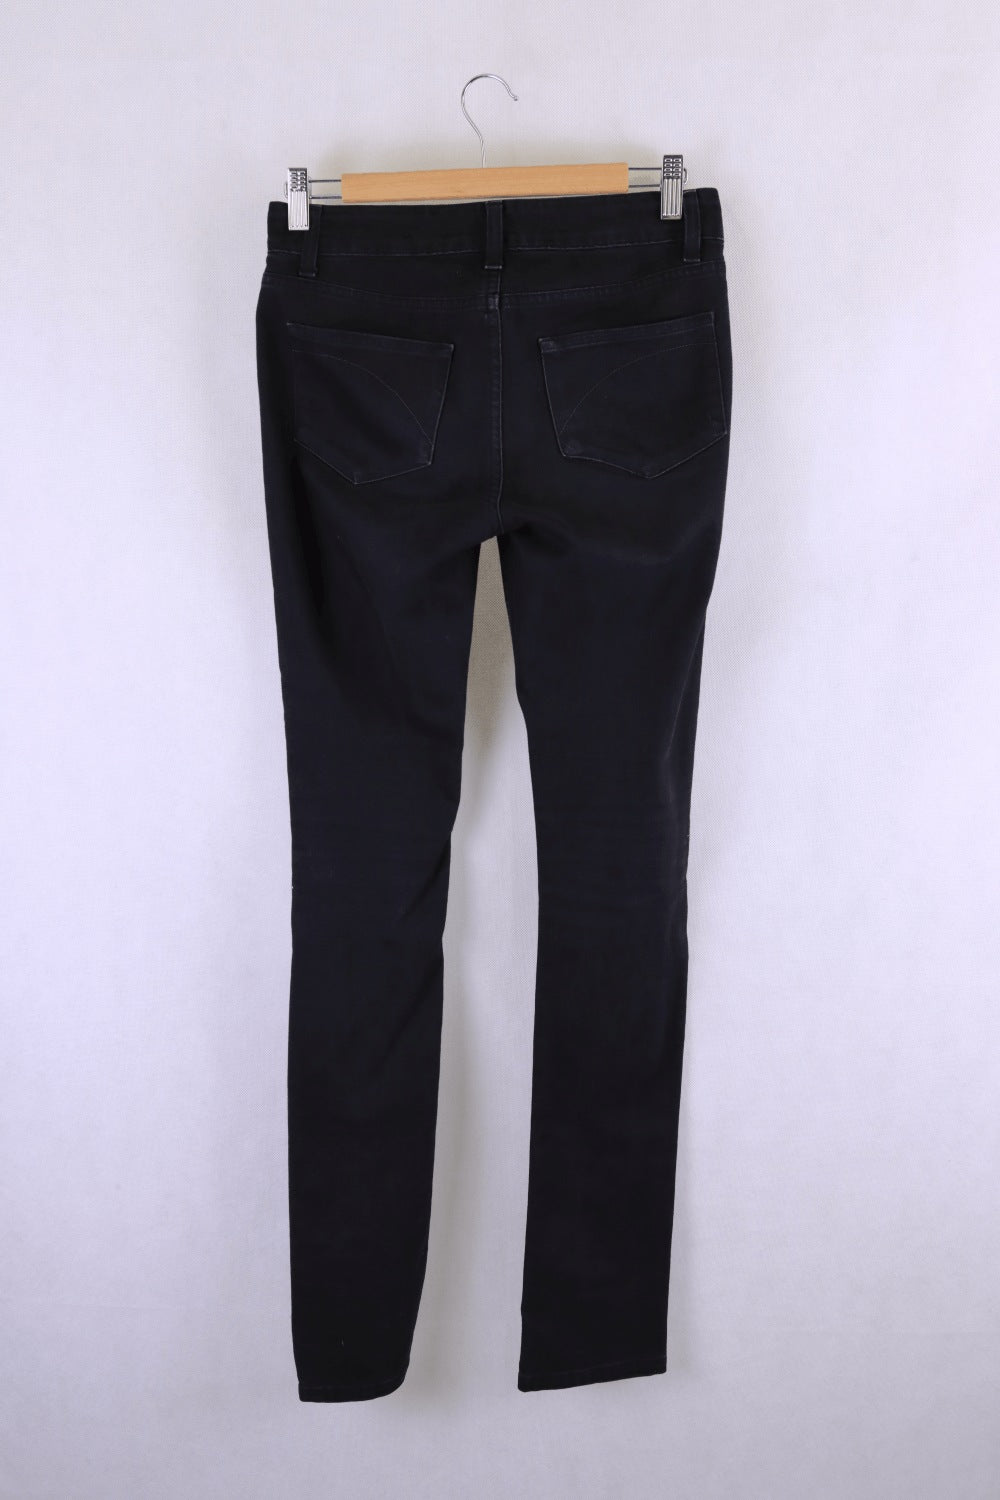 Superfine Charcoal Jeans S